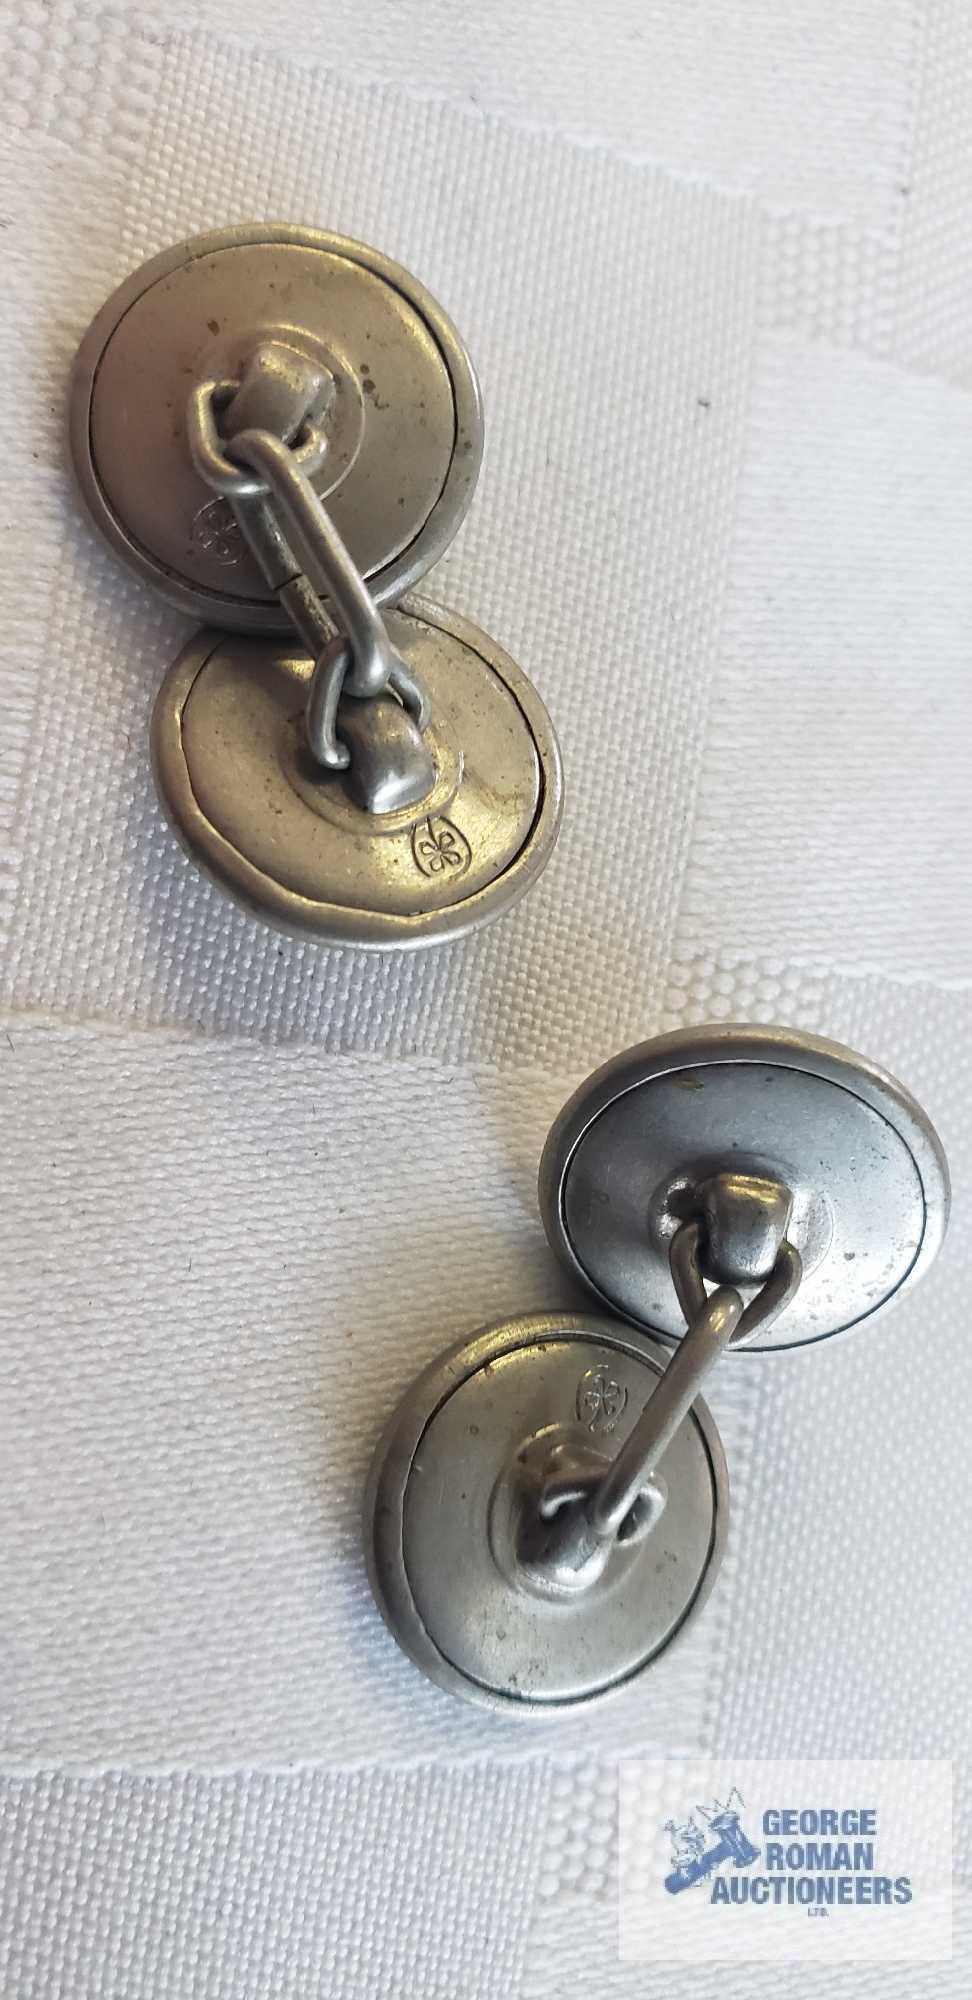 Cufflinks and tie tack